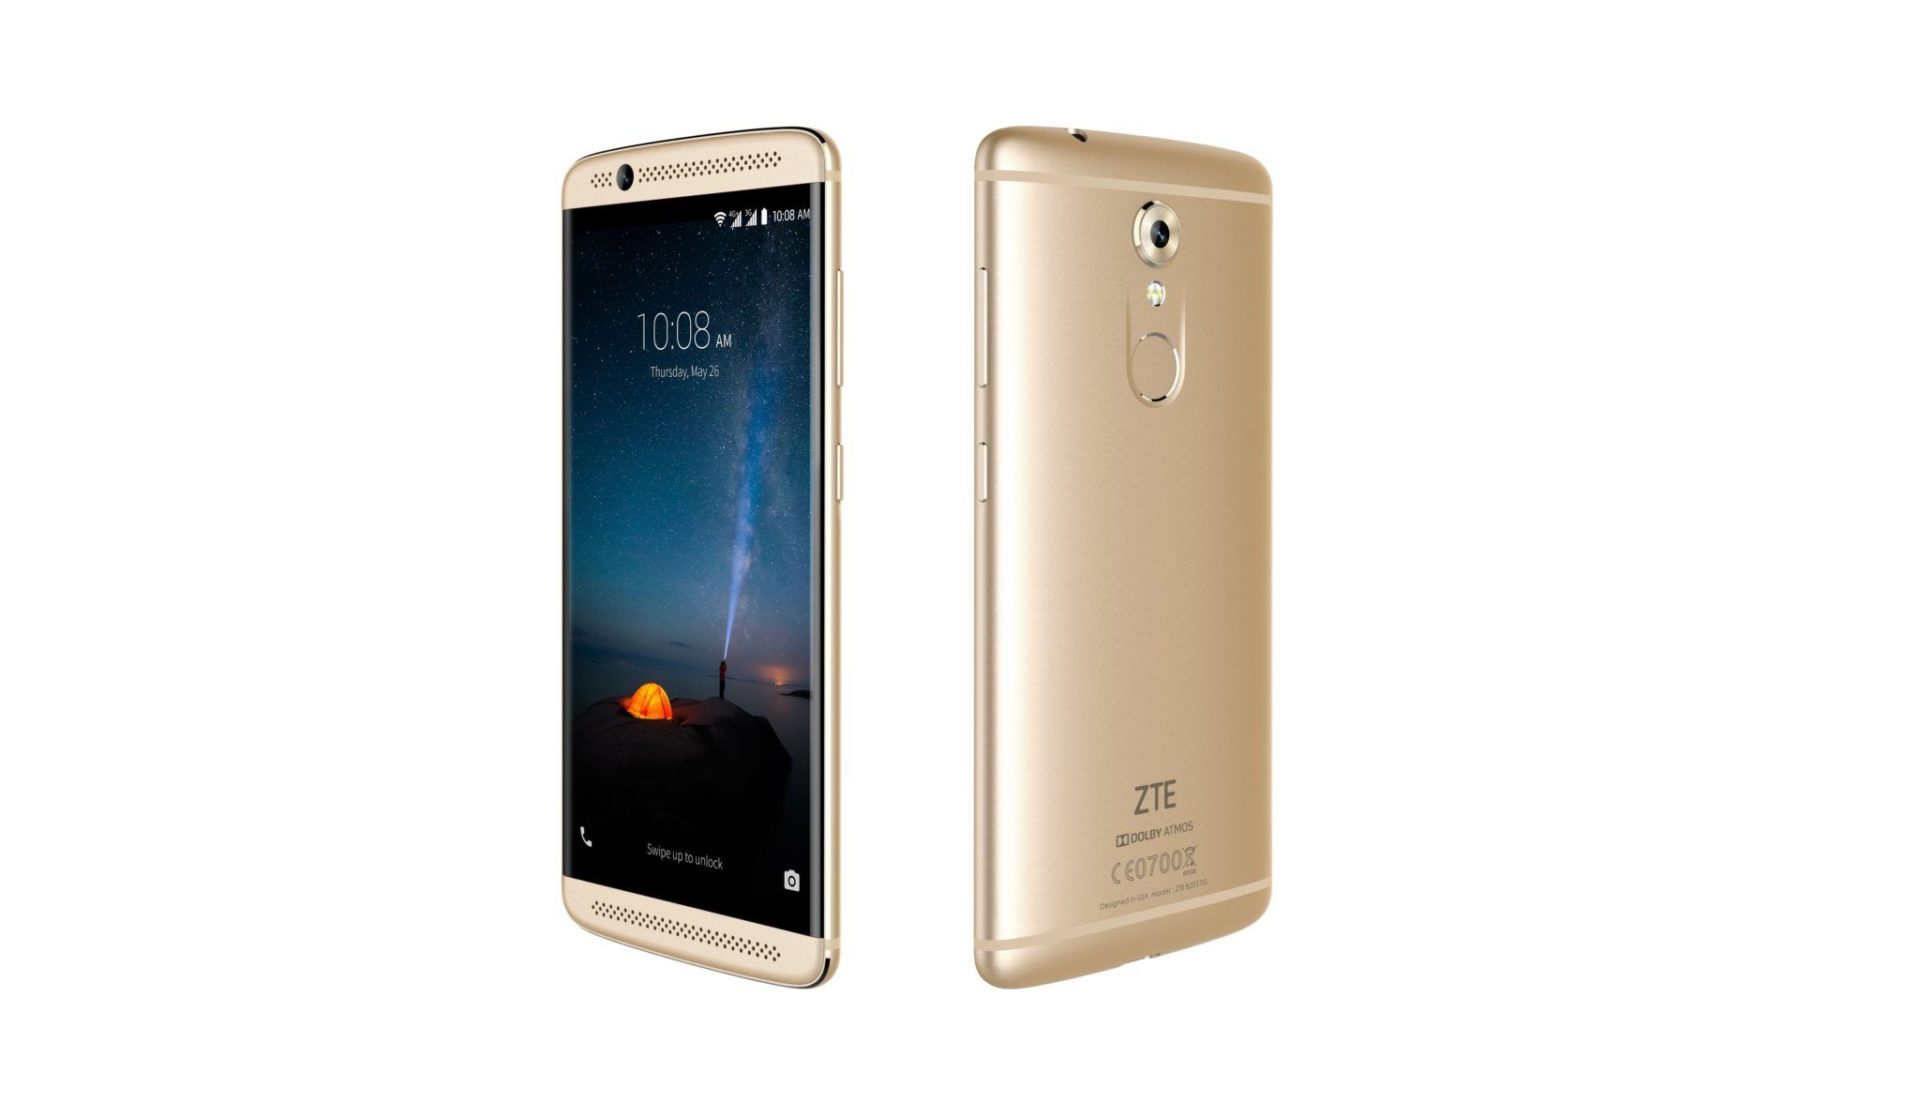 The ZTE Axon 7 is updated with different improvements